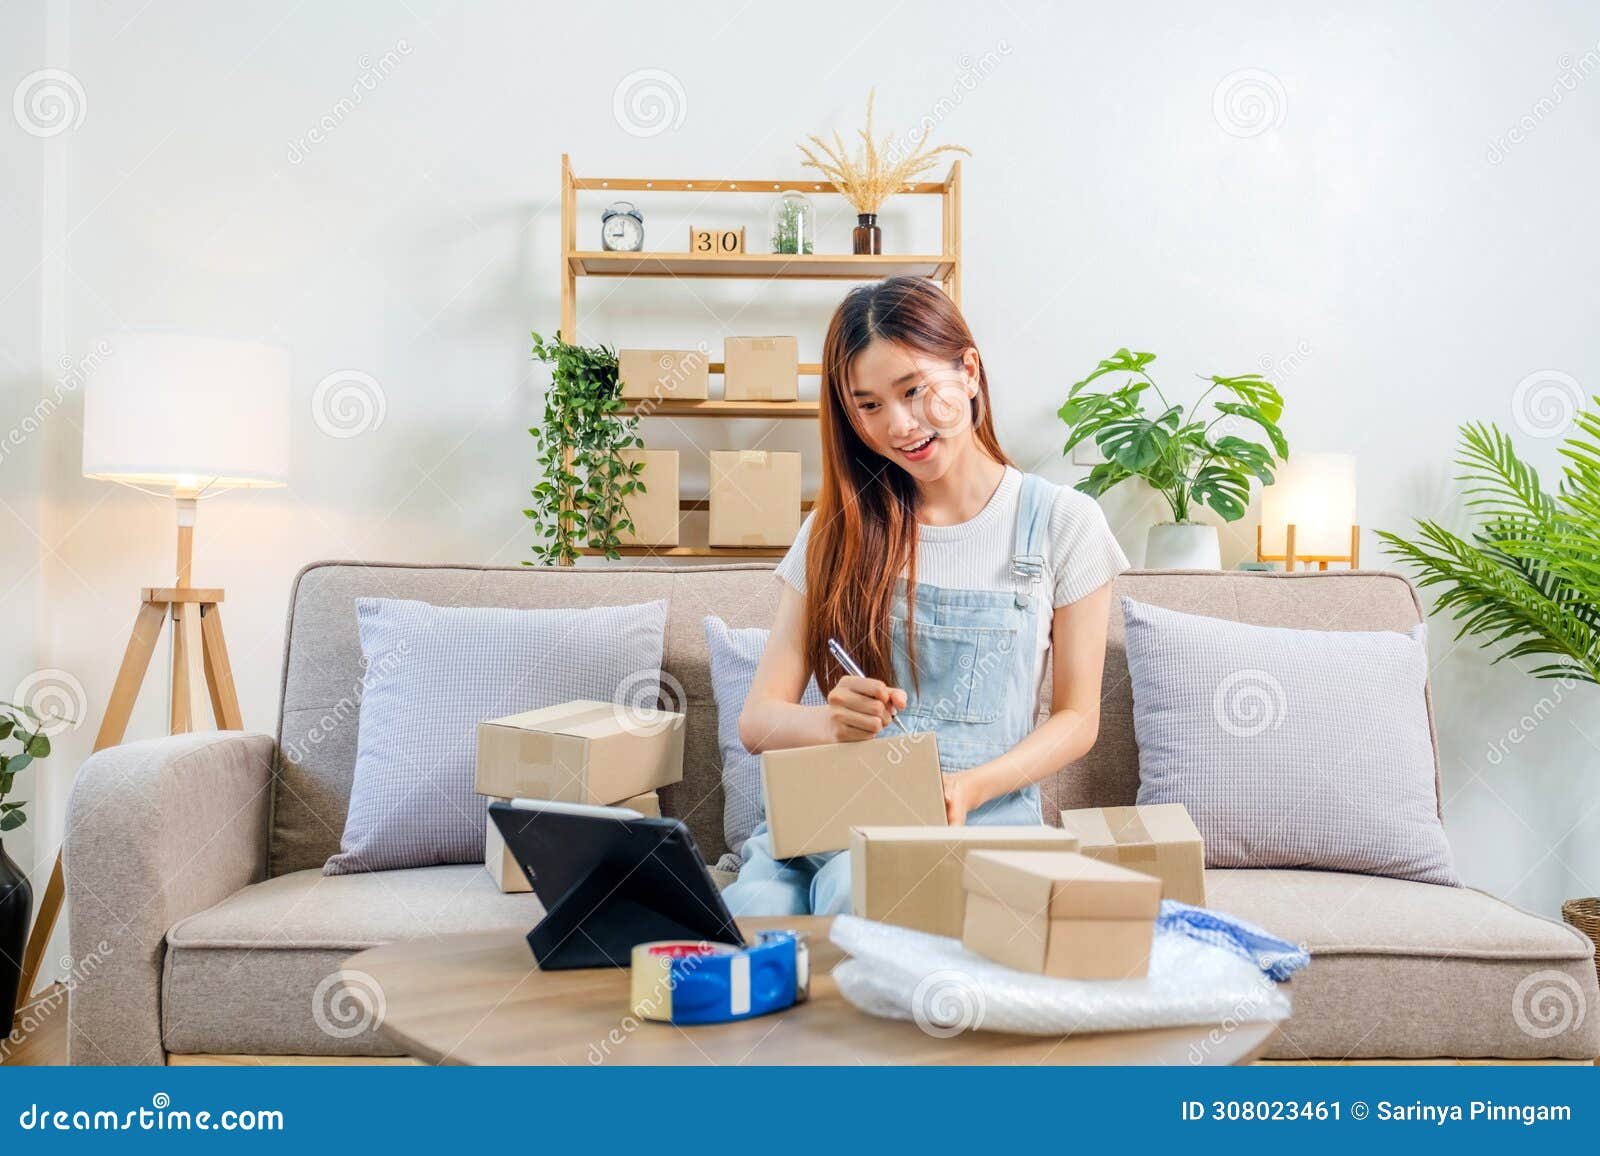 asian women sme freelance working with packaging startup entrepreneur small business owner at home,online business seller